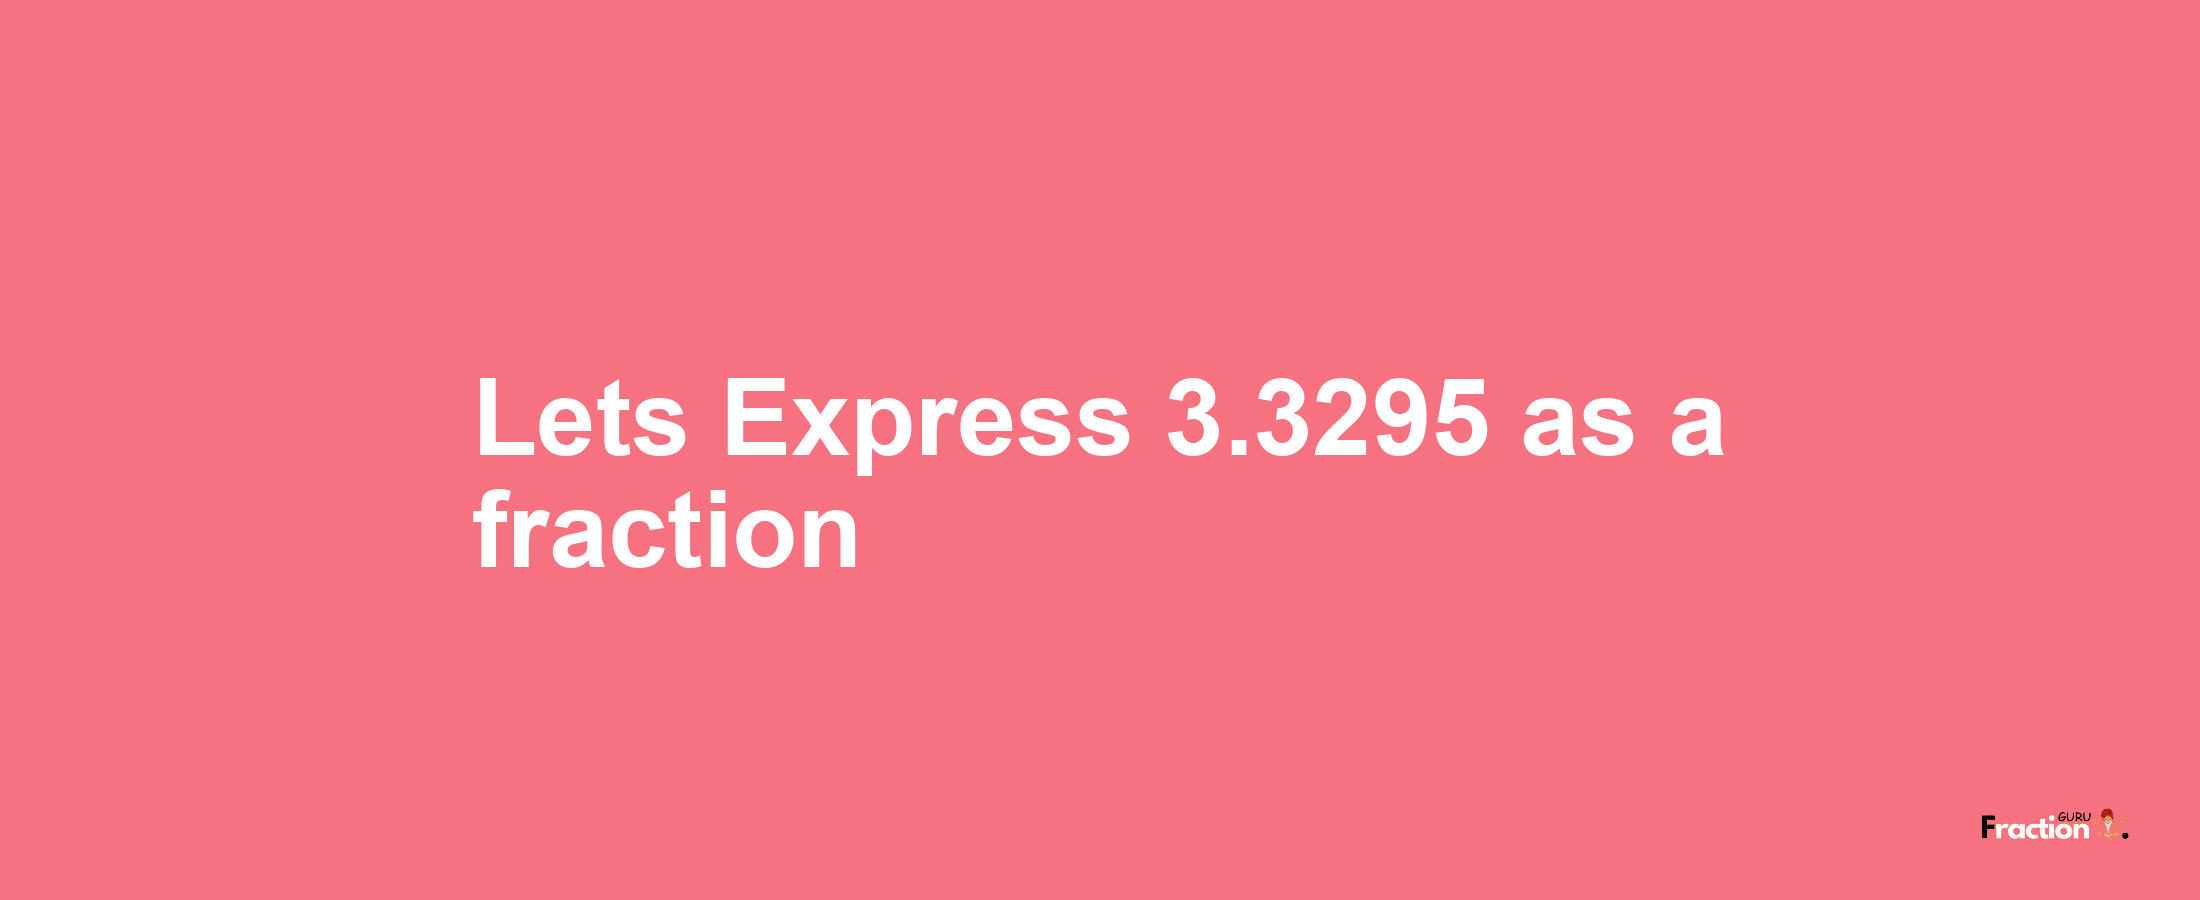 Lets Express 3.3295 as afraction